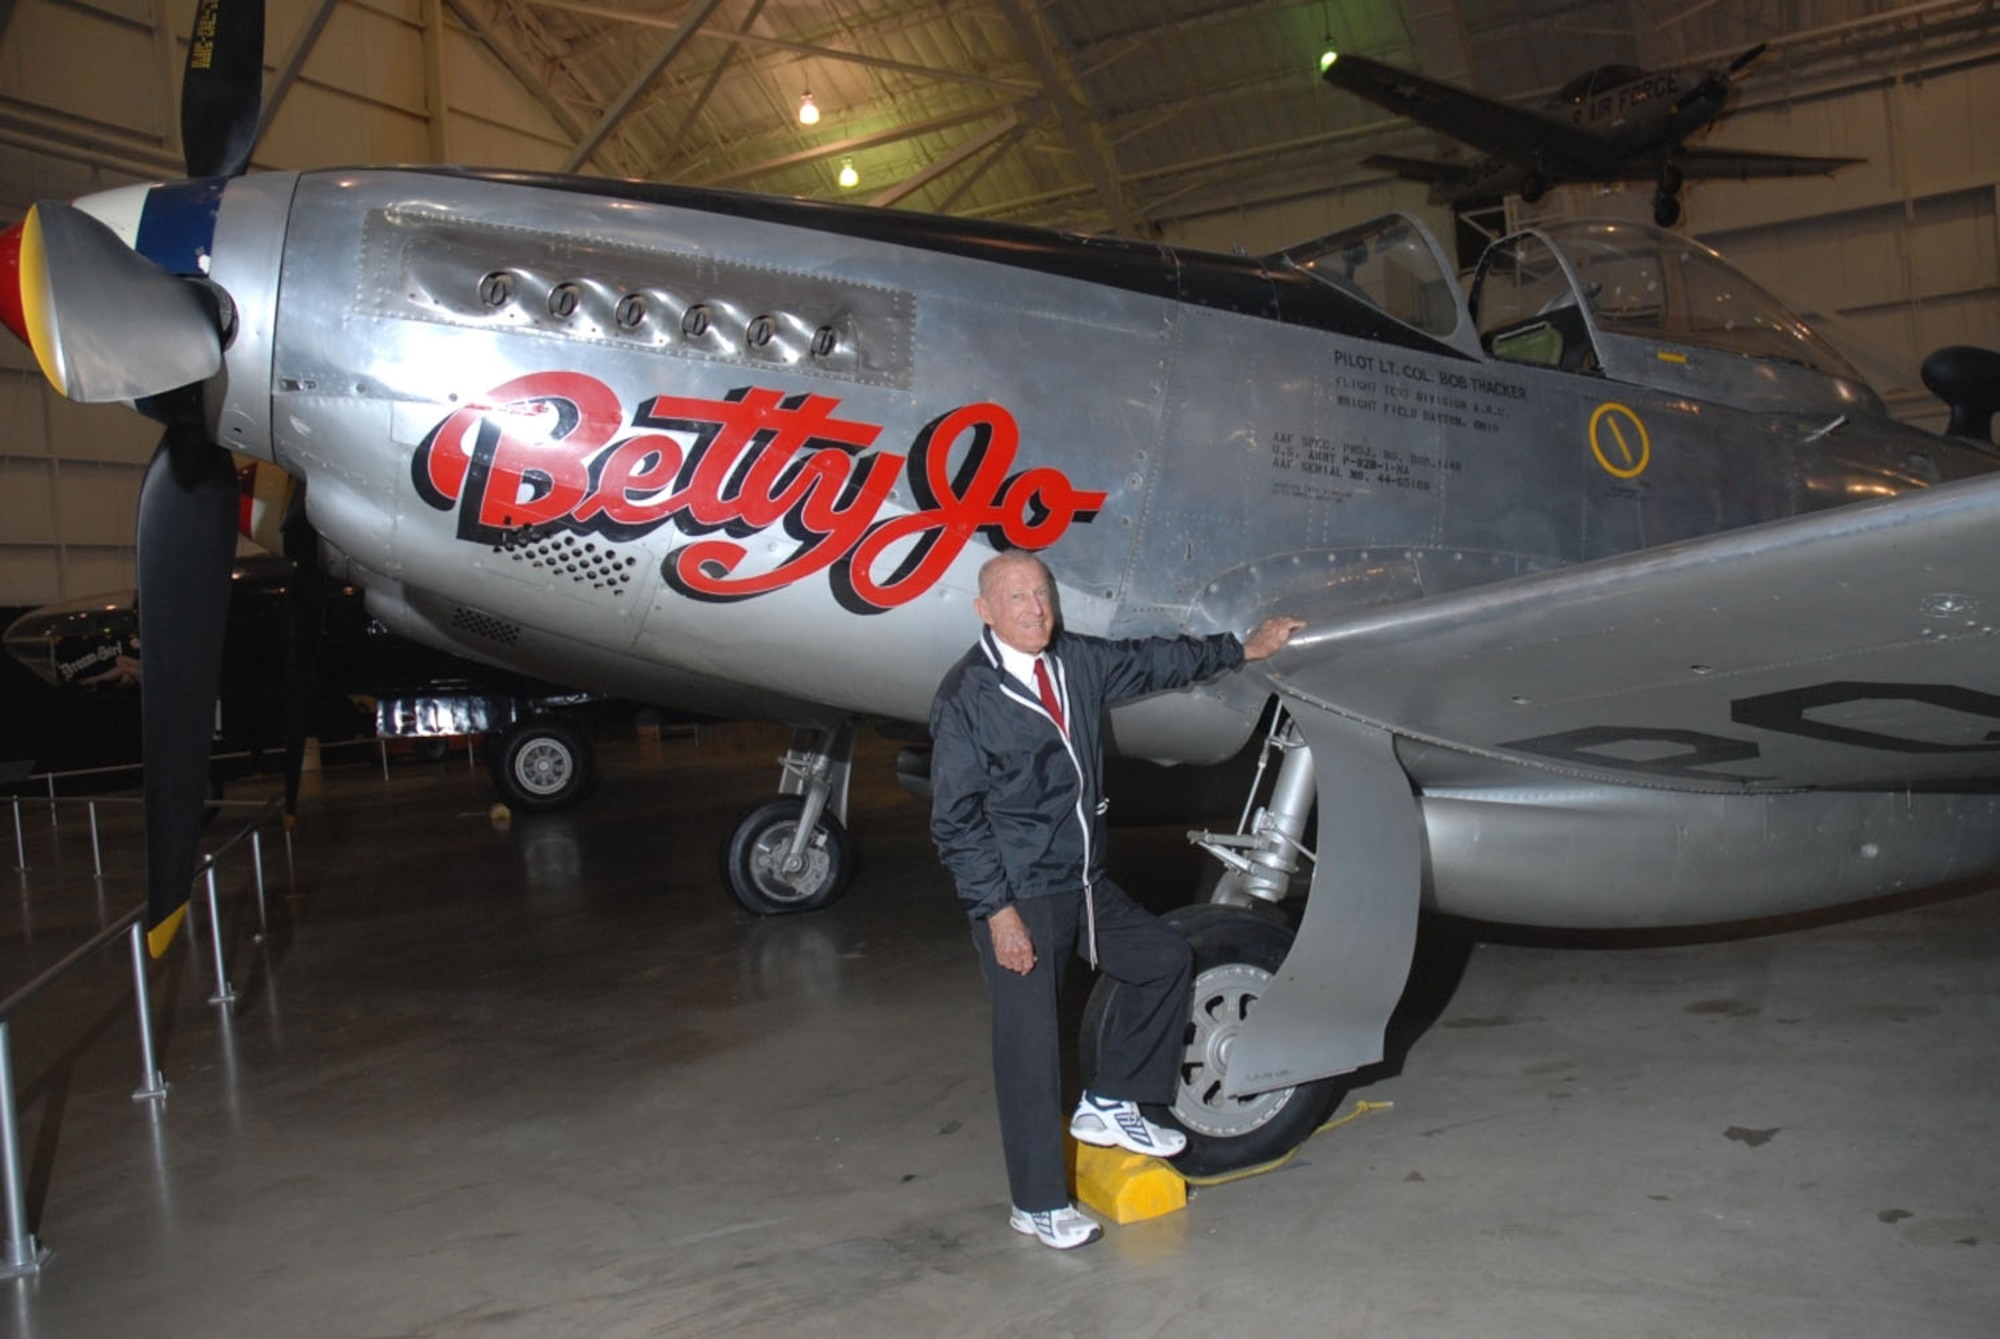 DAYTON, Ohio -- Col. Bob Thacker stands beside the North American F-82B Twin Mustang at the National Museum of the United States Air Force. The museum's F-82B, "Betty-Jo," flew from Hawaii to New York on Feb. 27-28, 1947, a distance of 5,051 miles, the longest non-stop flight ever made by a propeller-driven fighter. (U.S. Air Force photo)